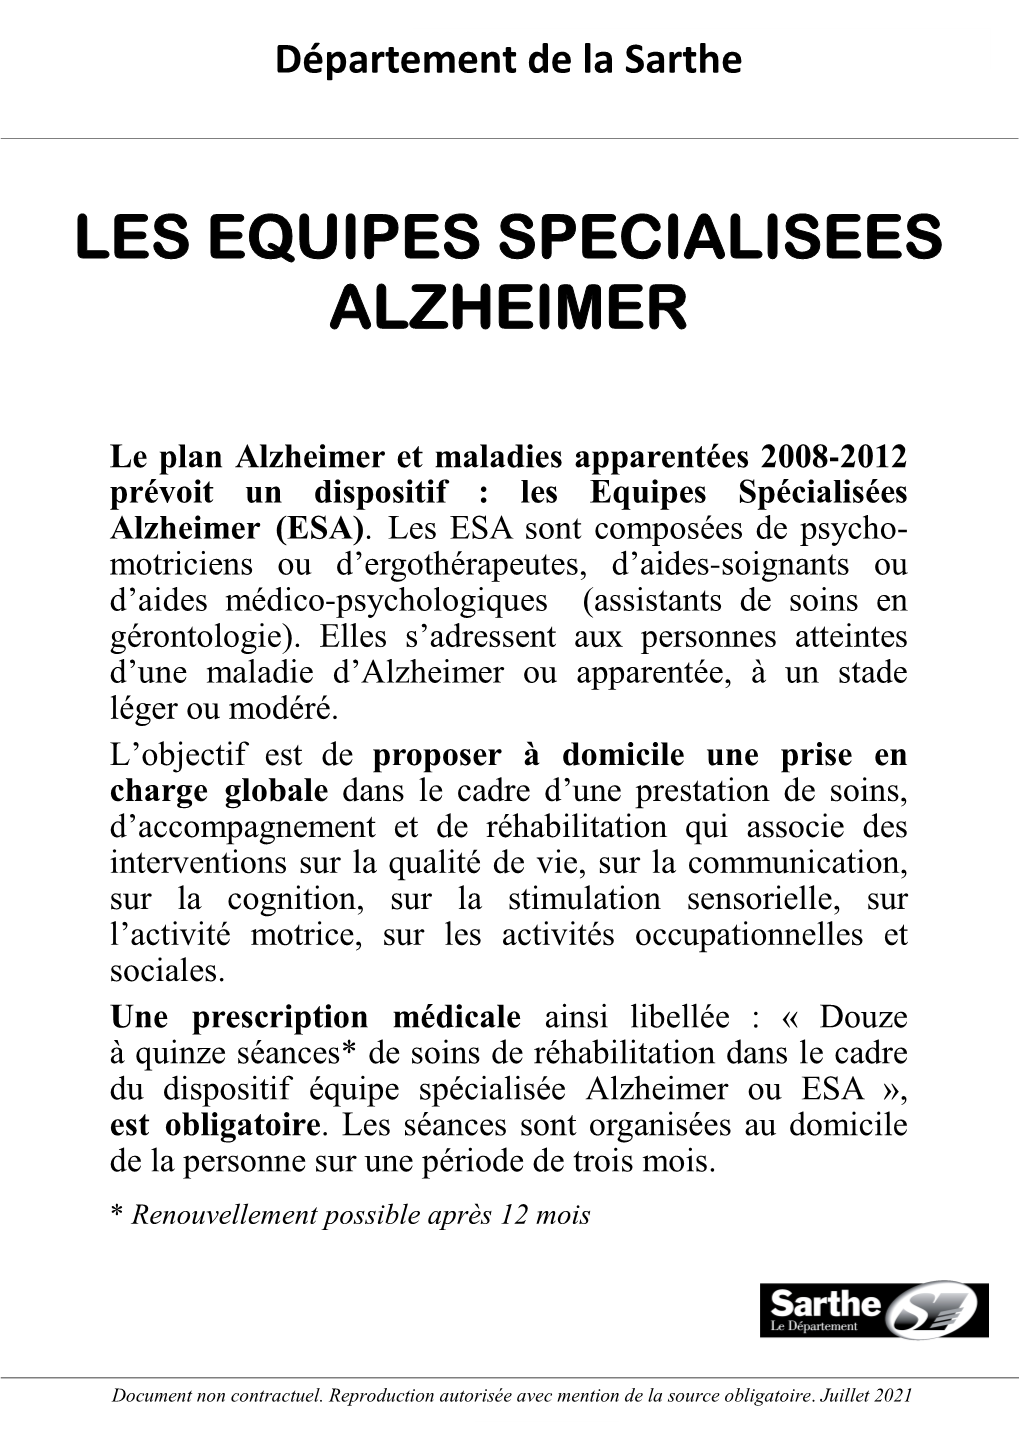 Les Equipes Specialisees Alzheimer